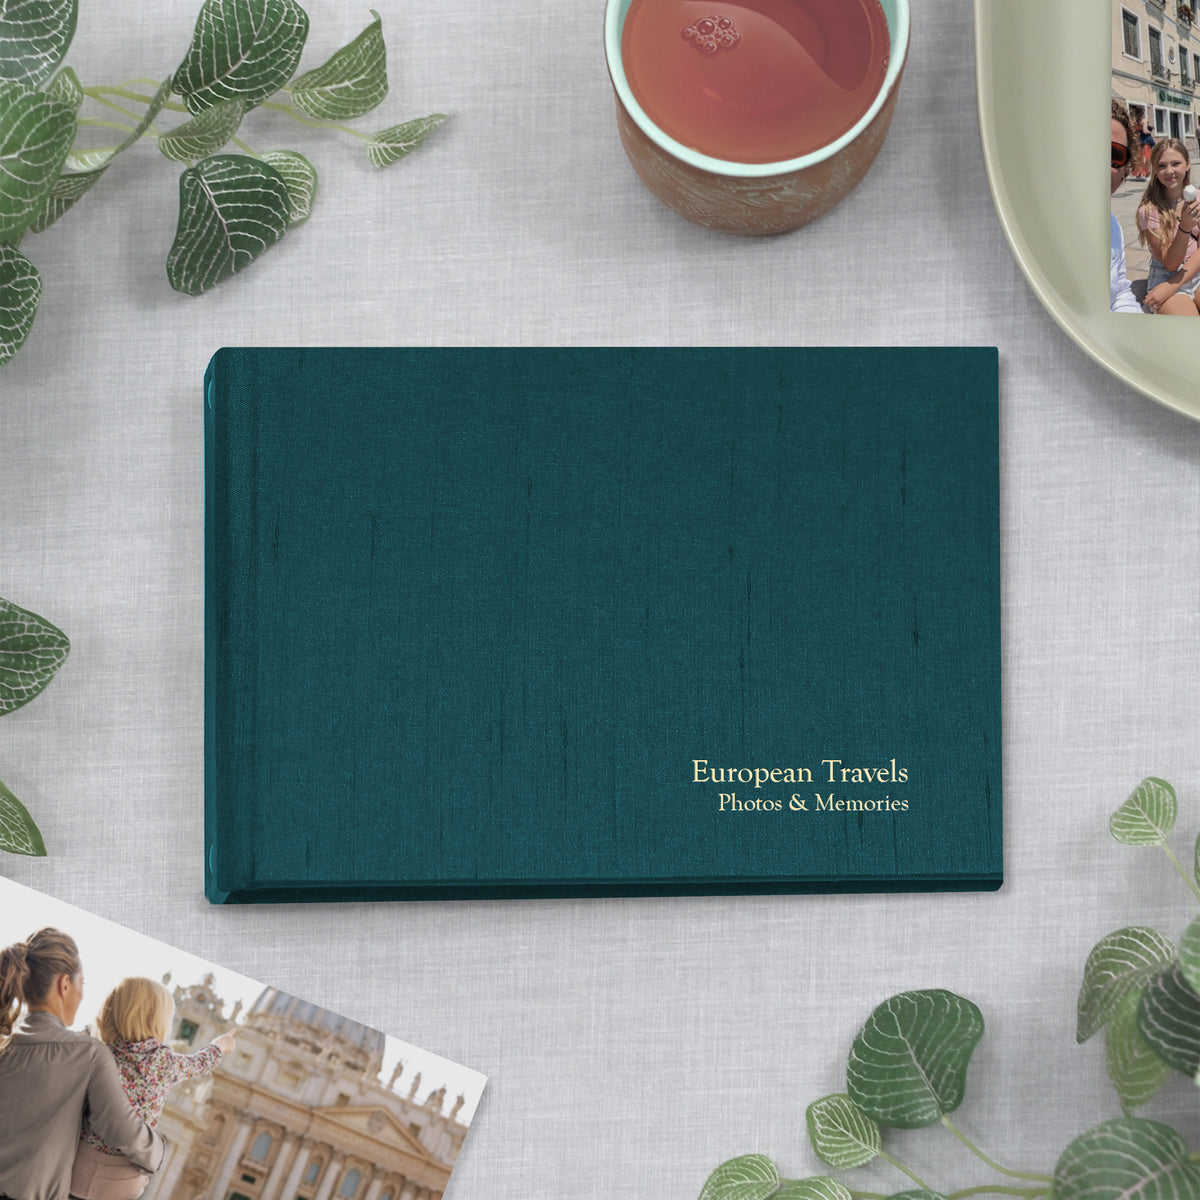 Small Photo Binder | for 5x7 Photos | with Teal Silk